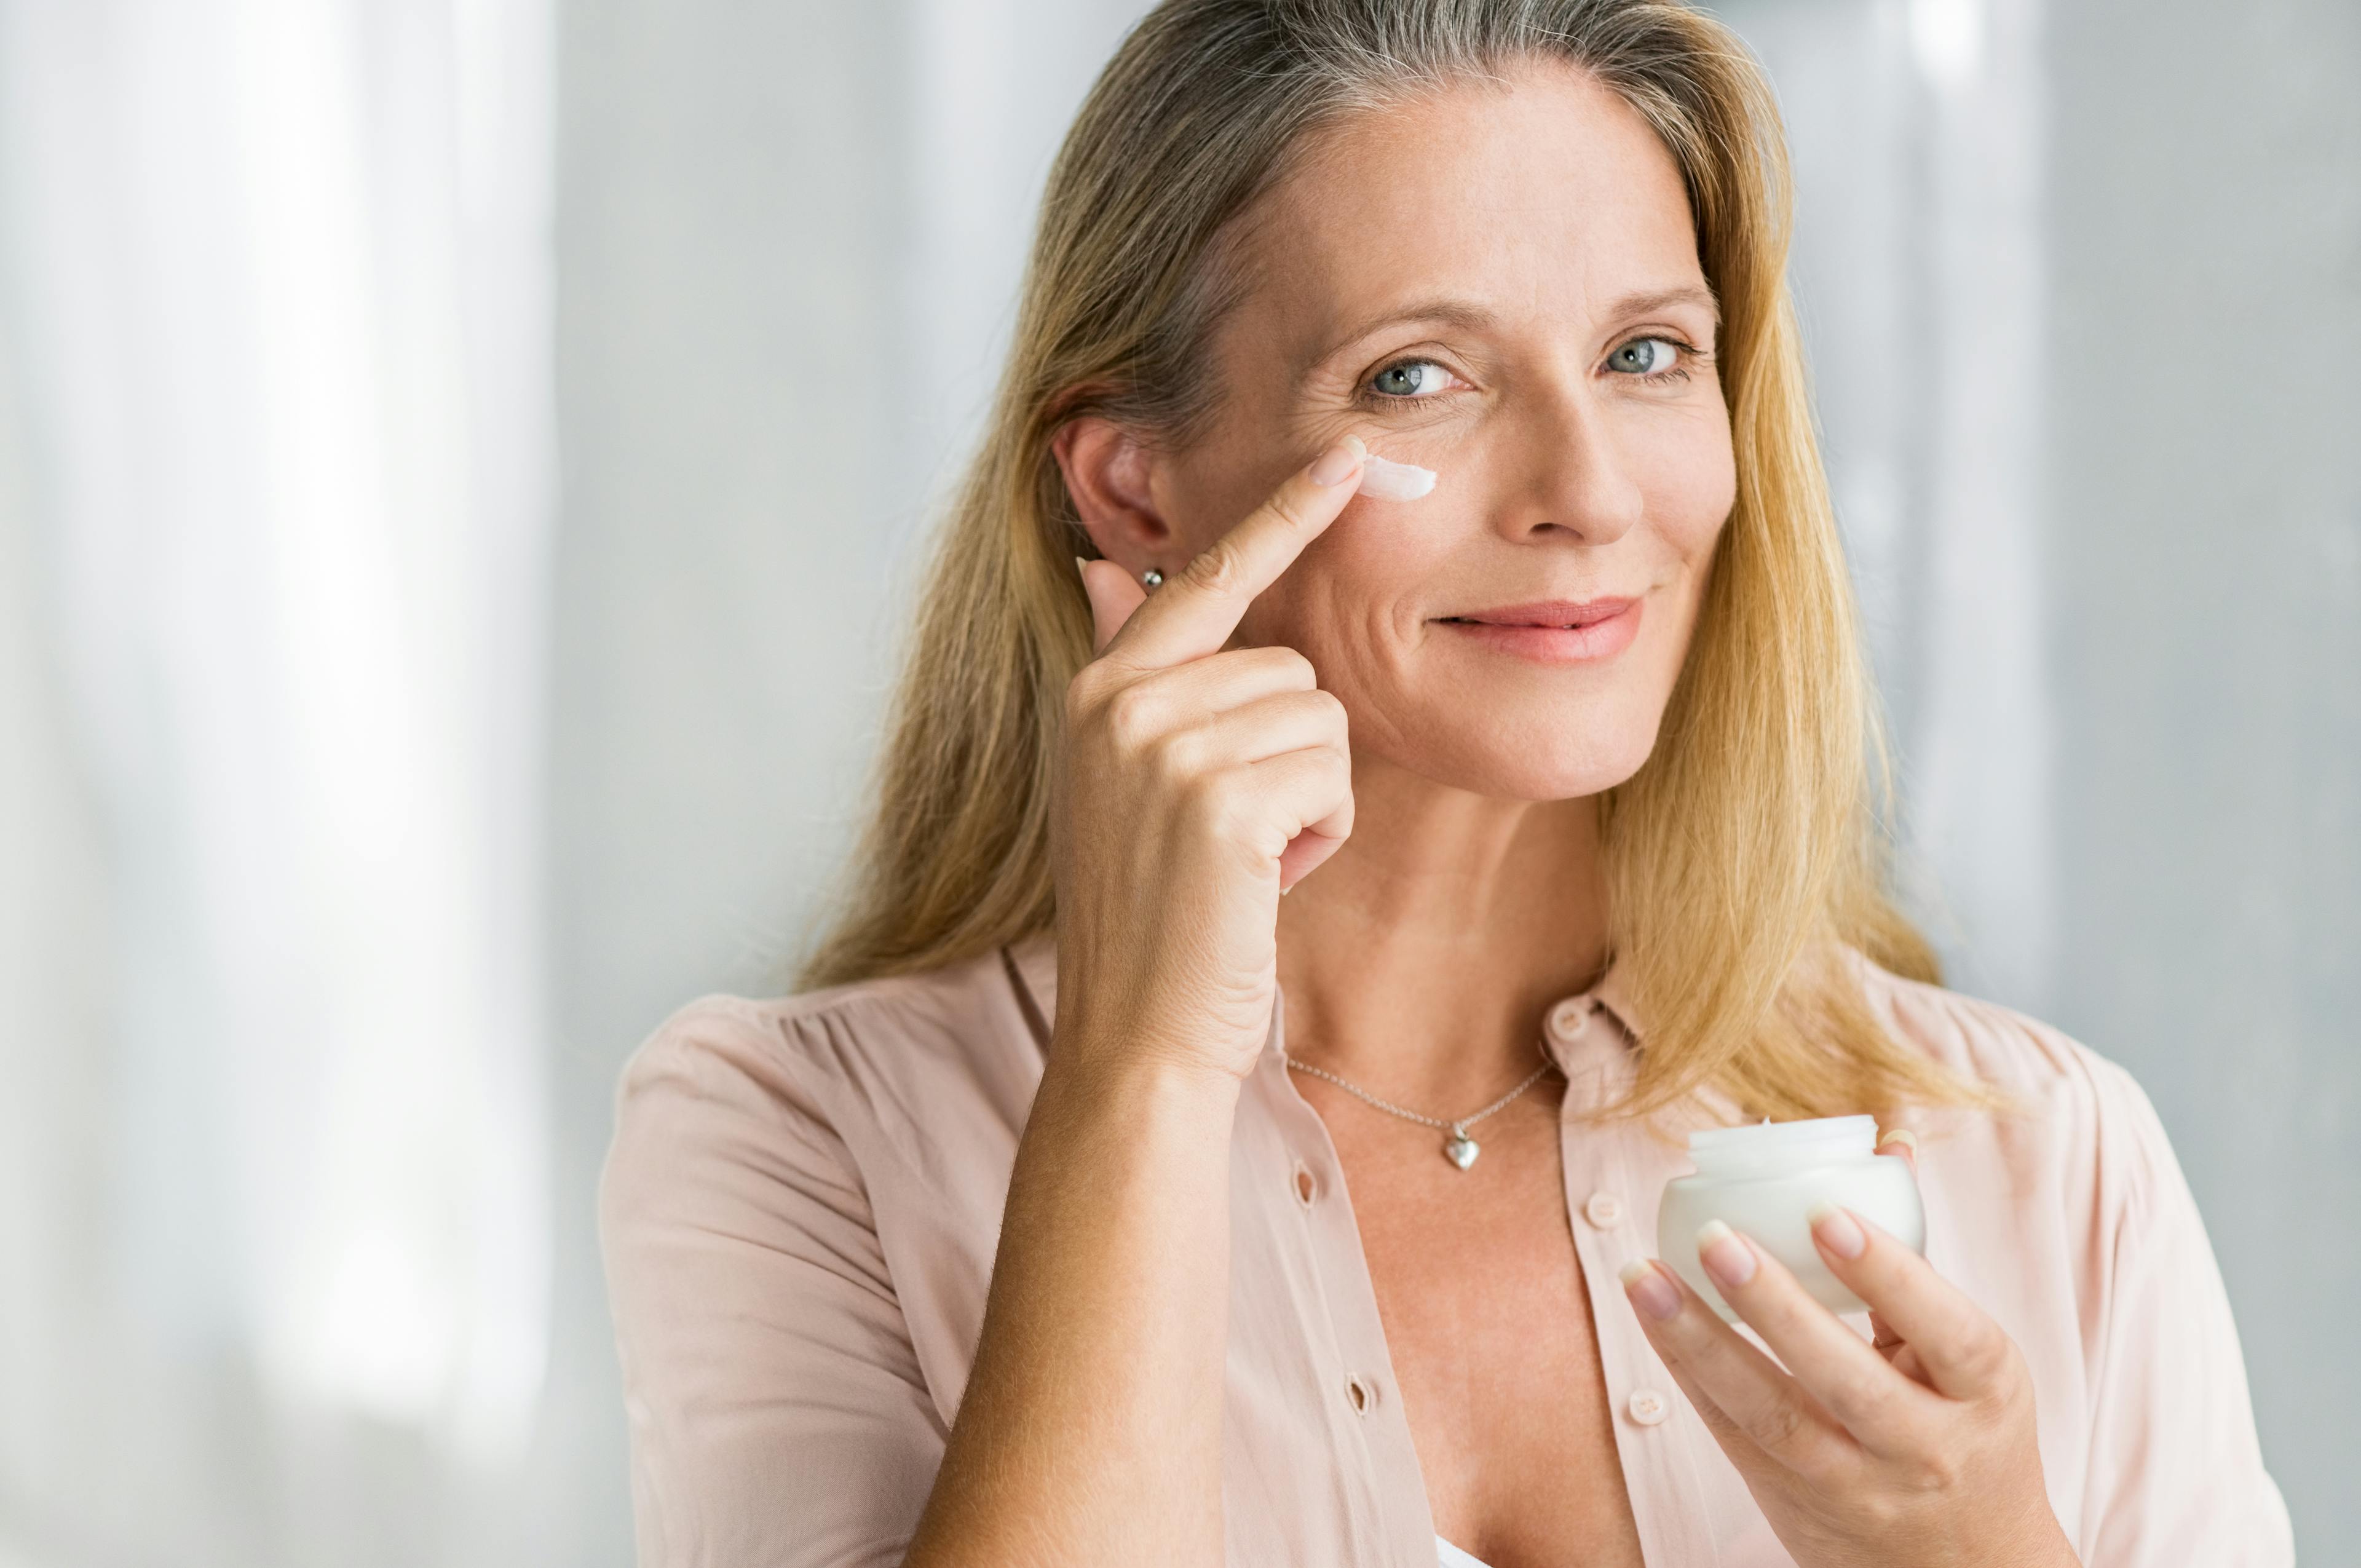 Picture of a woman rubbing cream on her face.